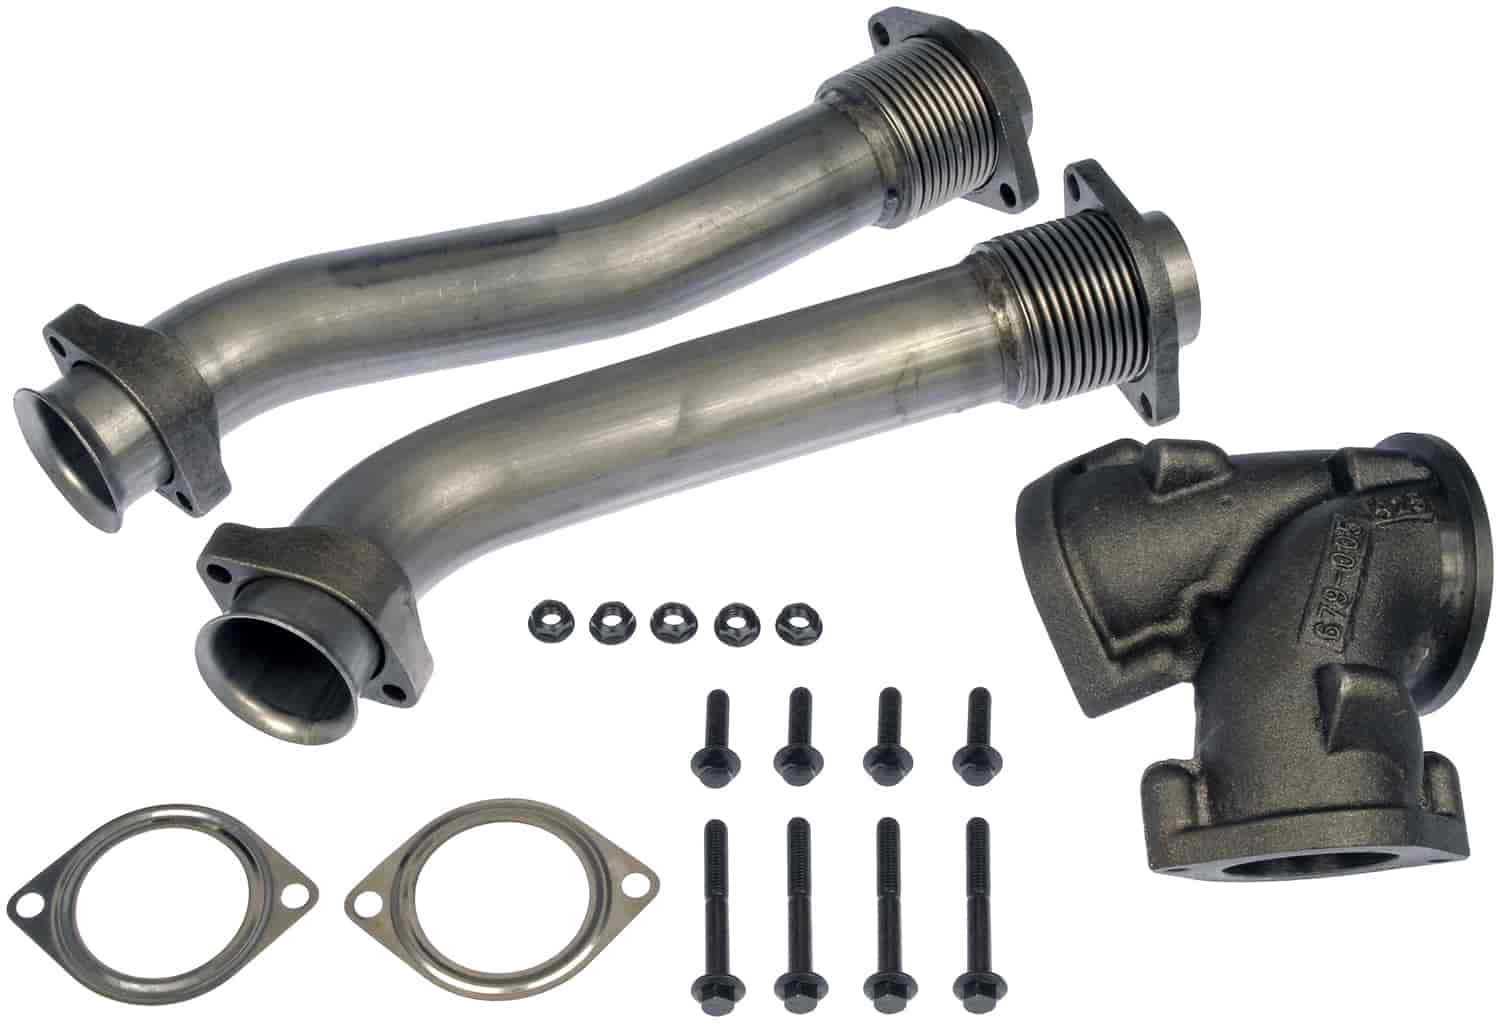 Turbocharger Up-Pipe Kit - Includes Hardware And Gaskets